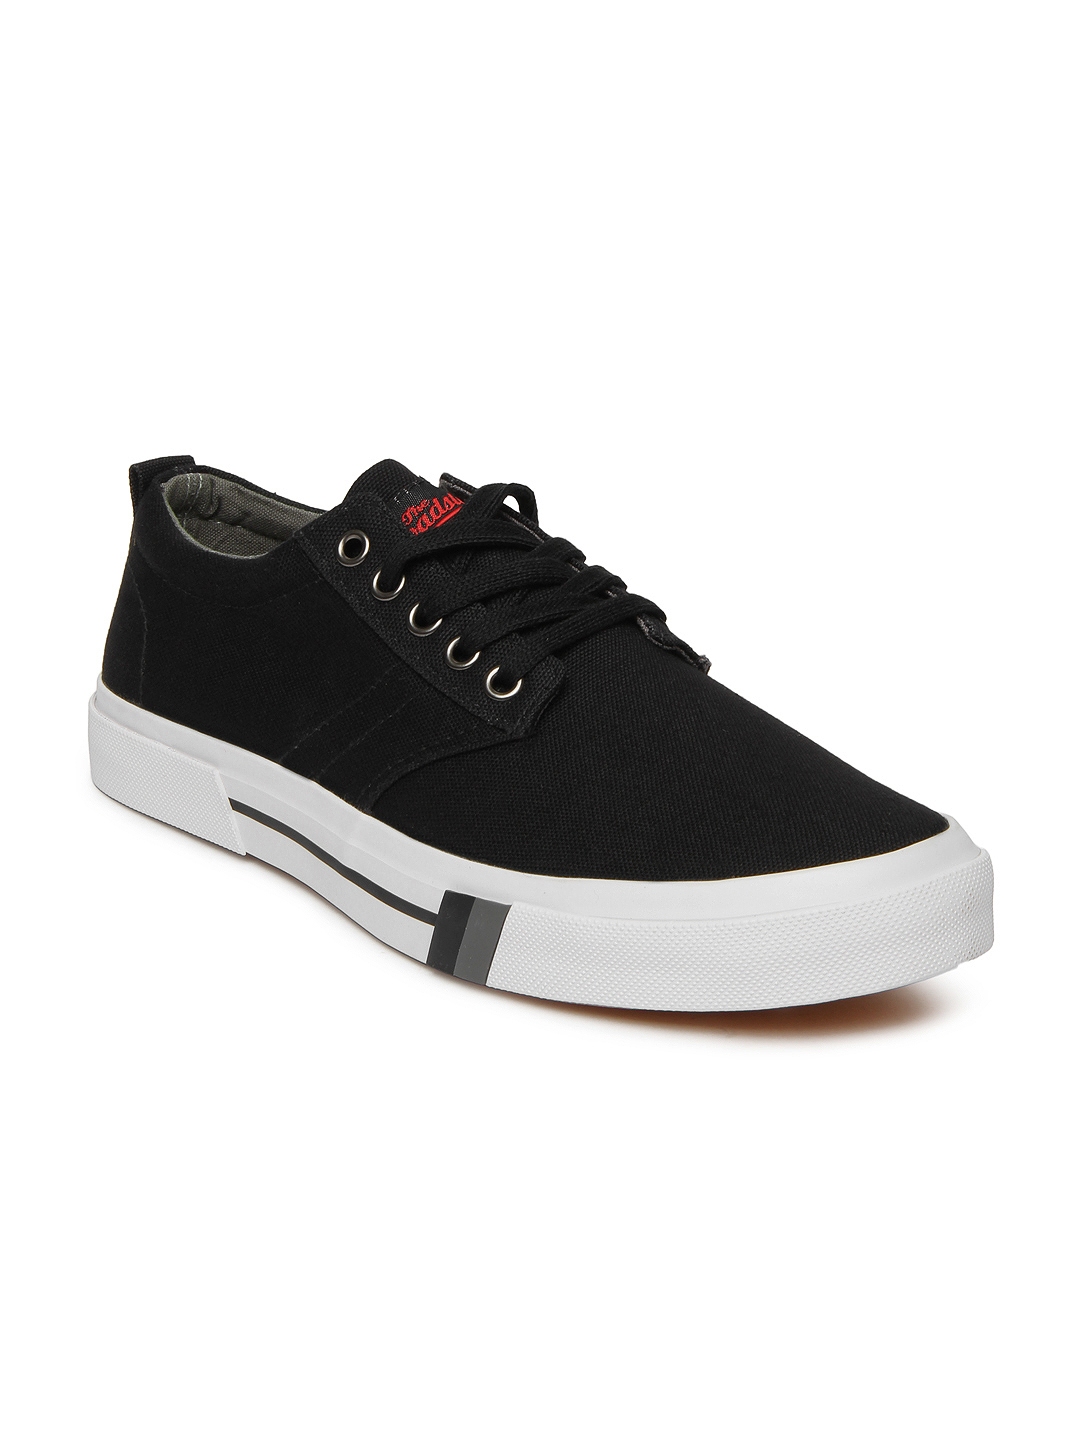 Buy Roadster Men Black Casual Shoes - Casual Shoes for Men 438792 | Myntra